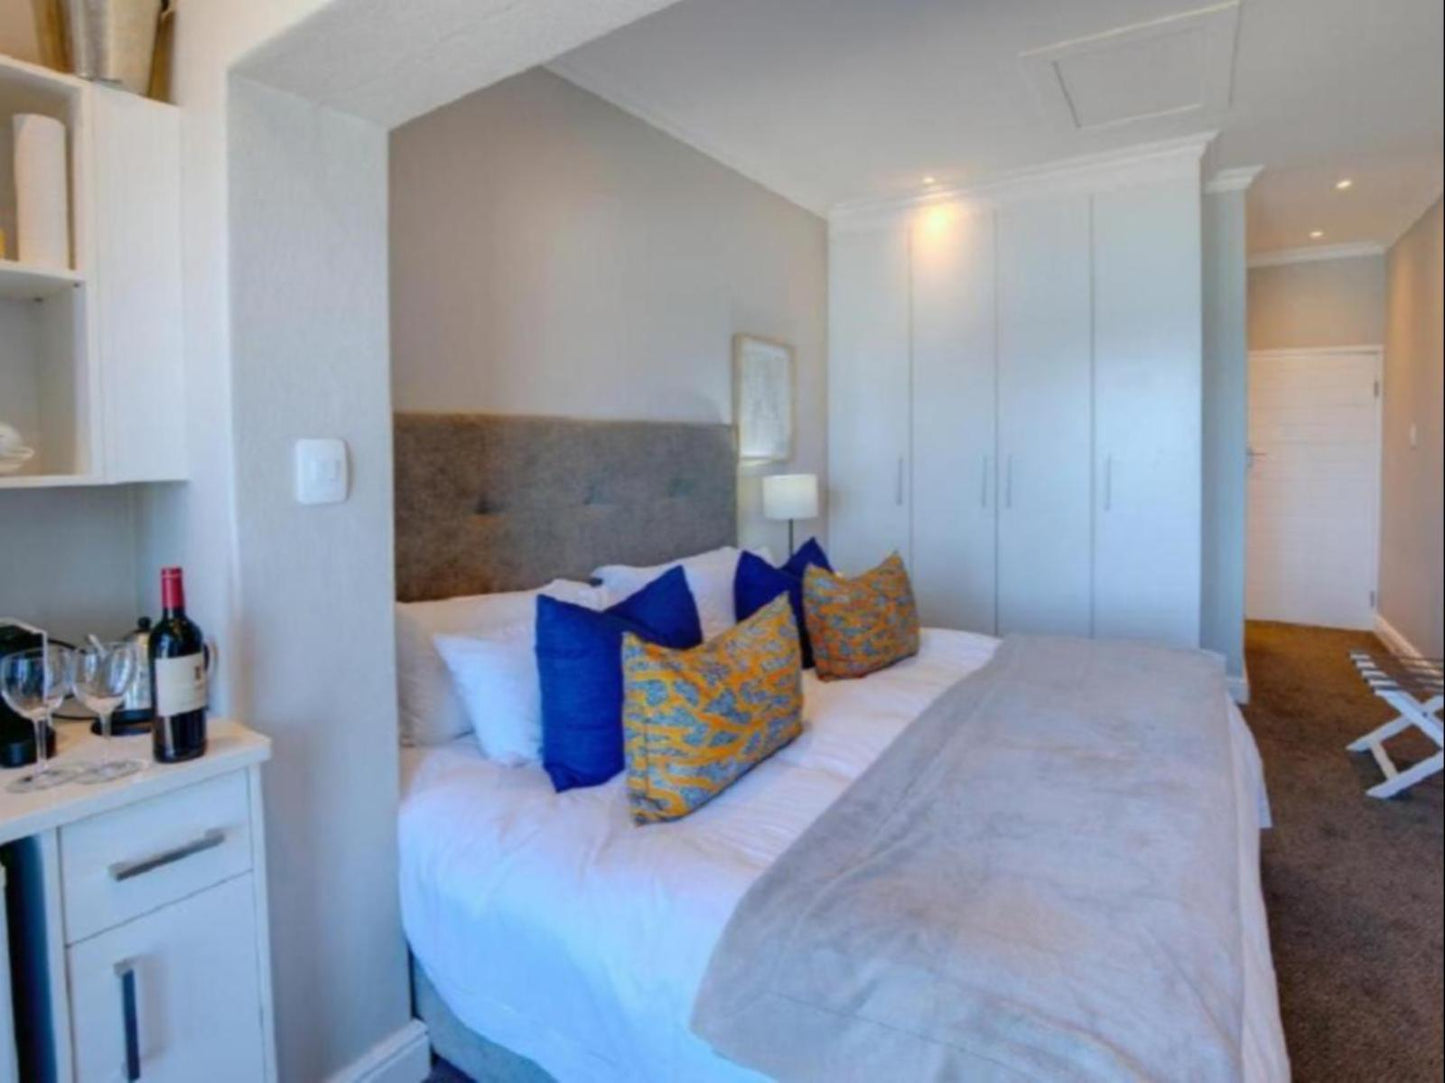 Luxury Suite With Ocean View @ Bay Lodge